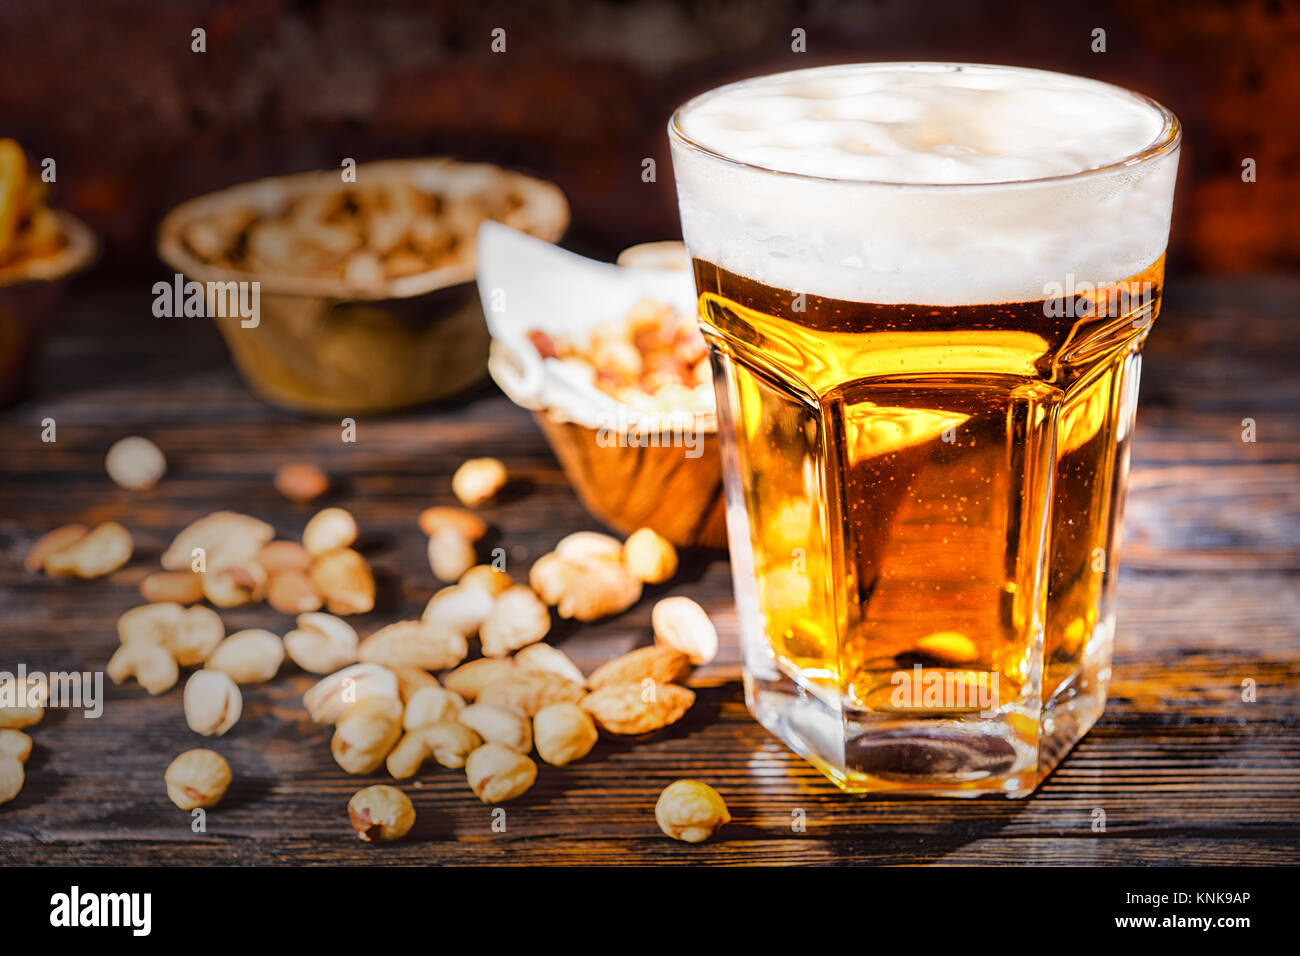 Glass with freshly poured light beer near plates with snacks and scattered nuts on dark wooden desk. Food and beverages concept Stock Photo